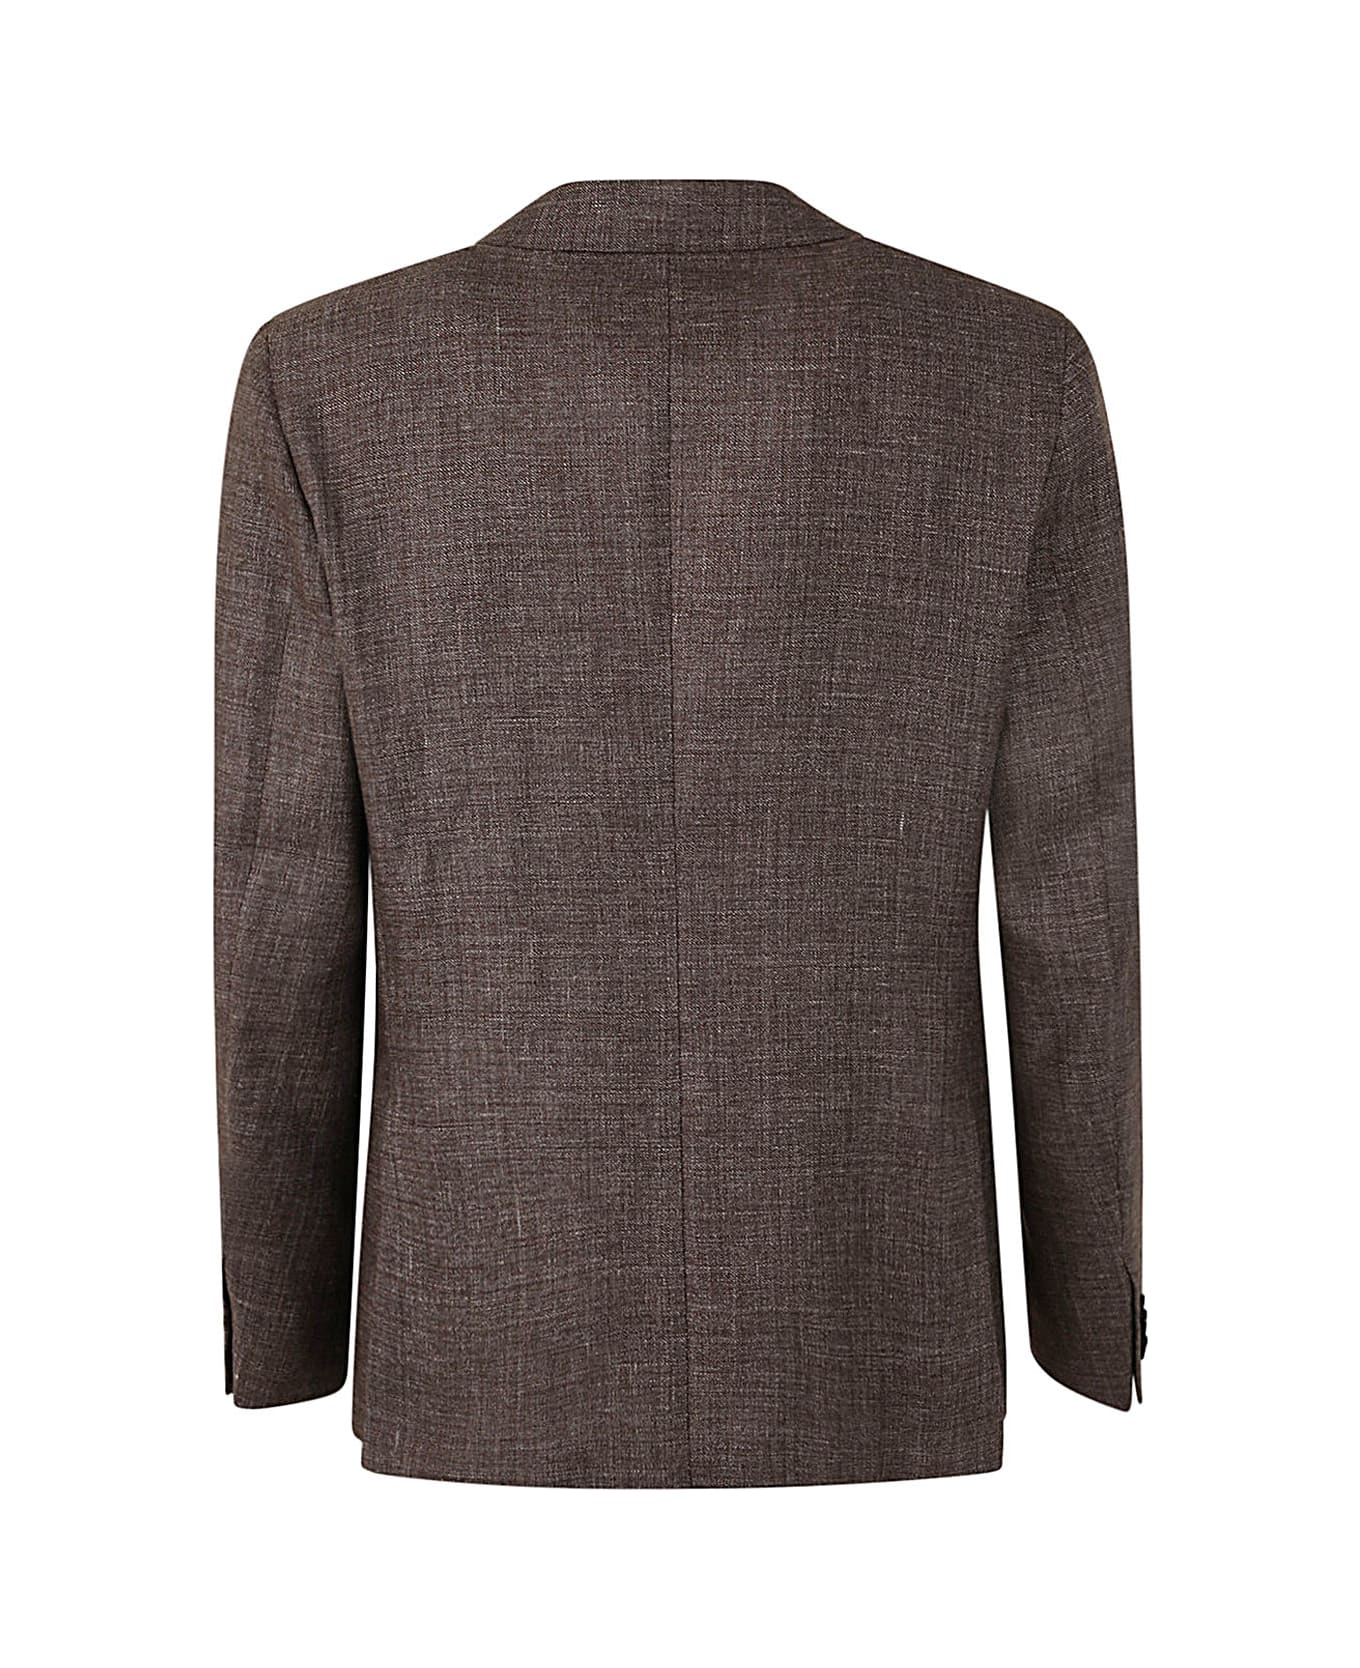 Zegna Linen And Wool Jacket - Brown